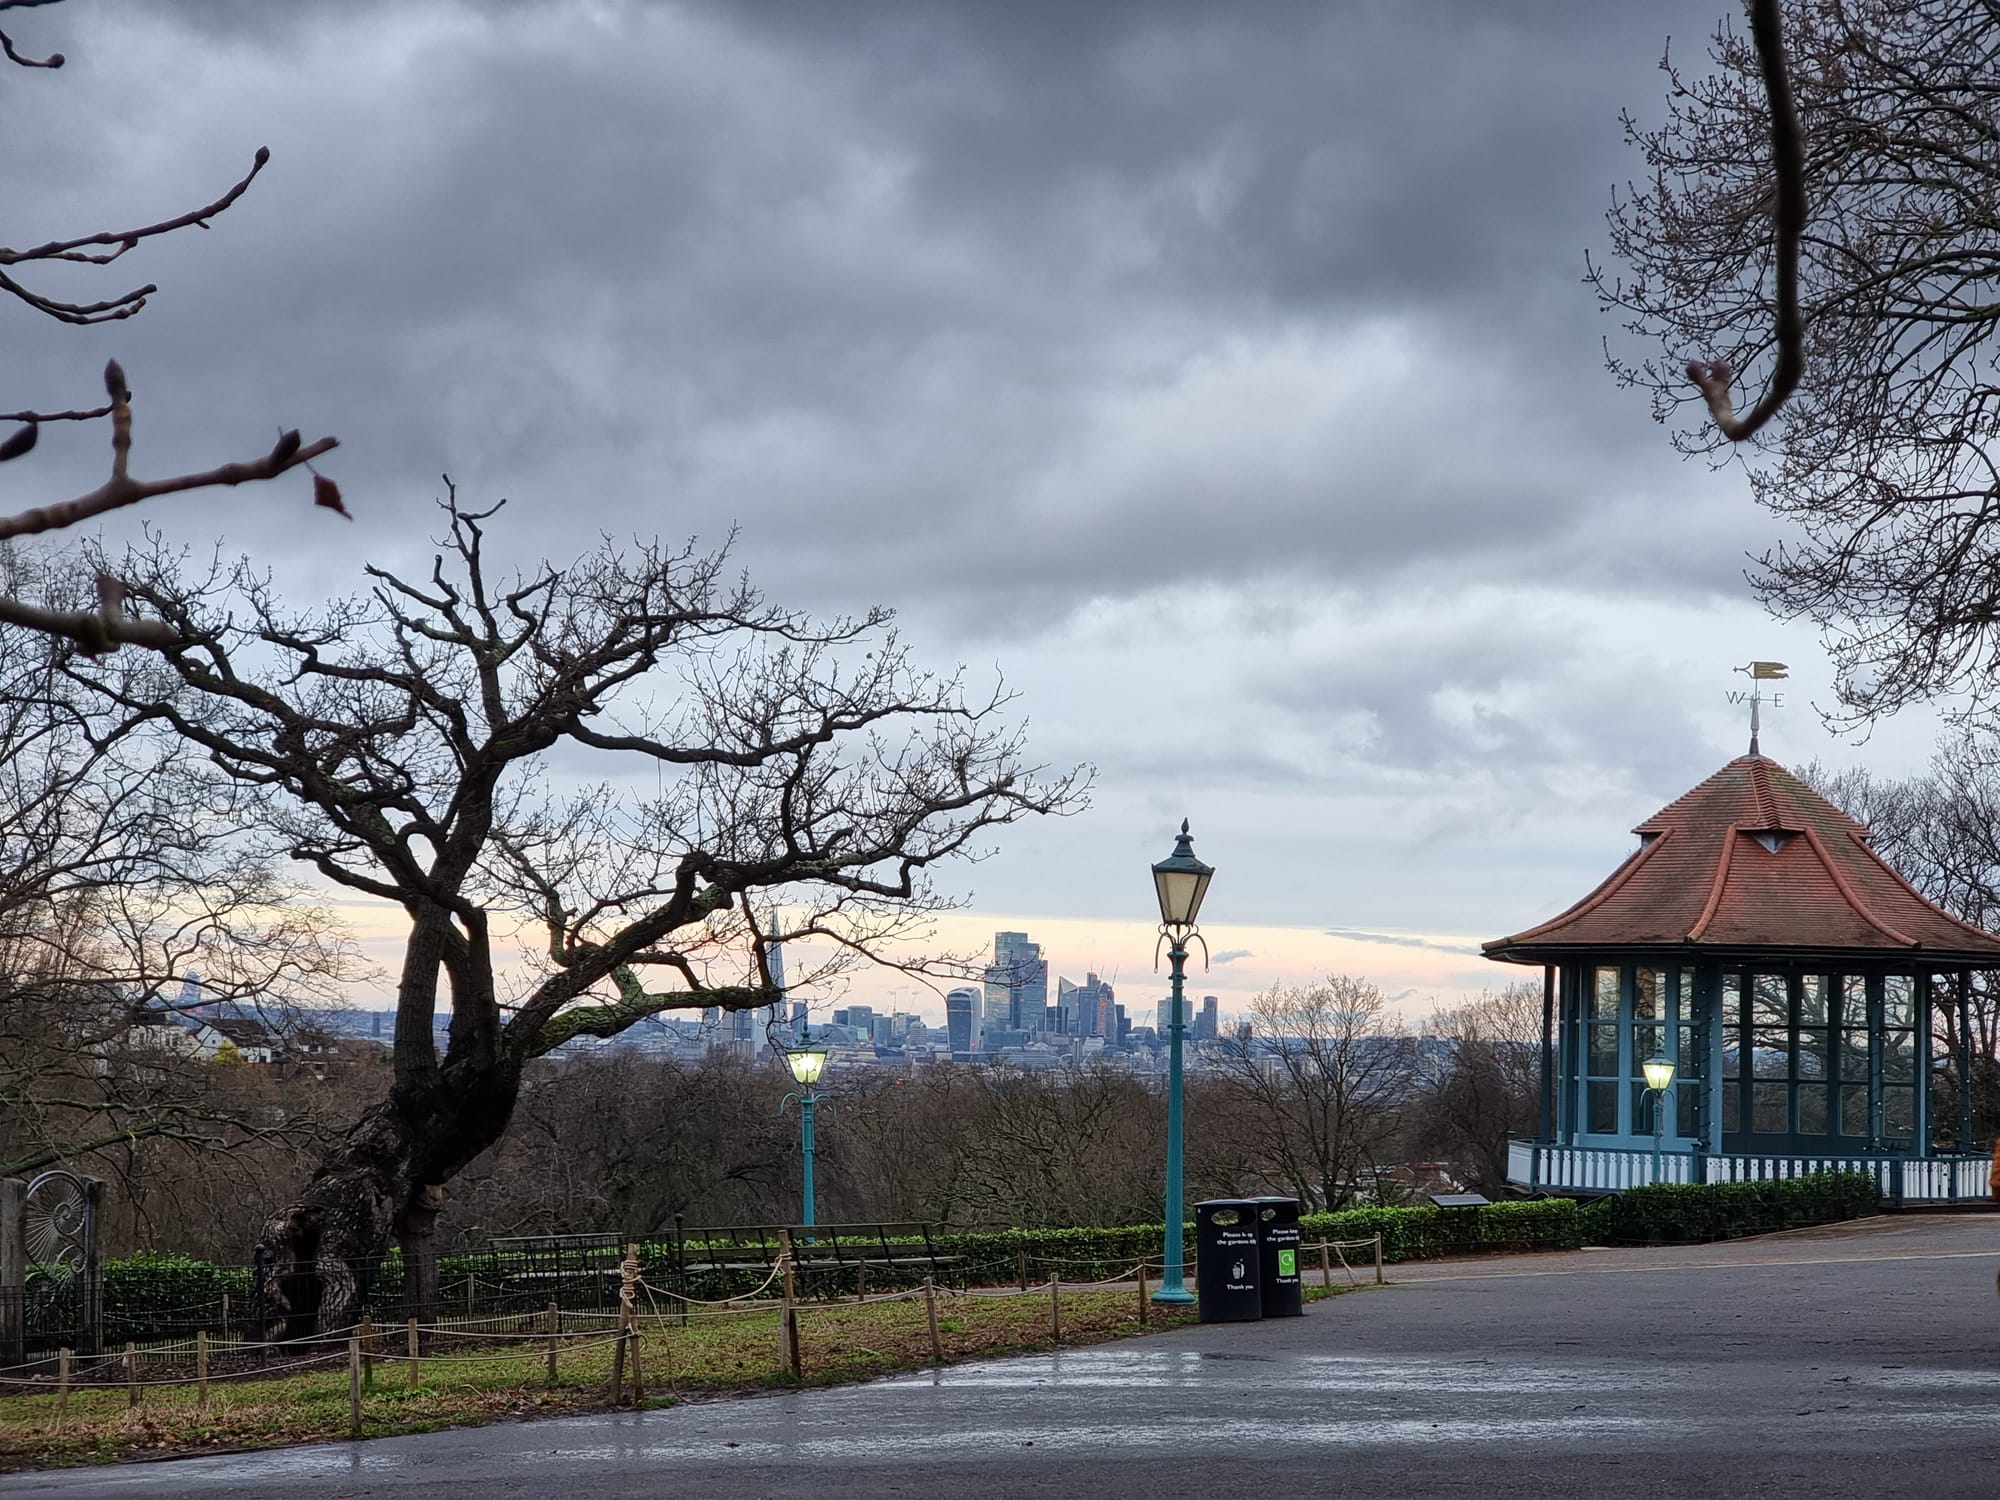 View into the skyline of Central London from a hill in the South. A gnarly tree to the left, an arbour to the right, a street-lamp in the centre and a grey-blue sky above.